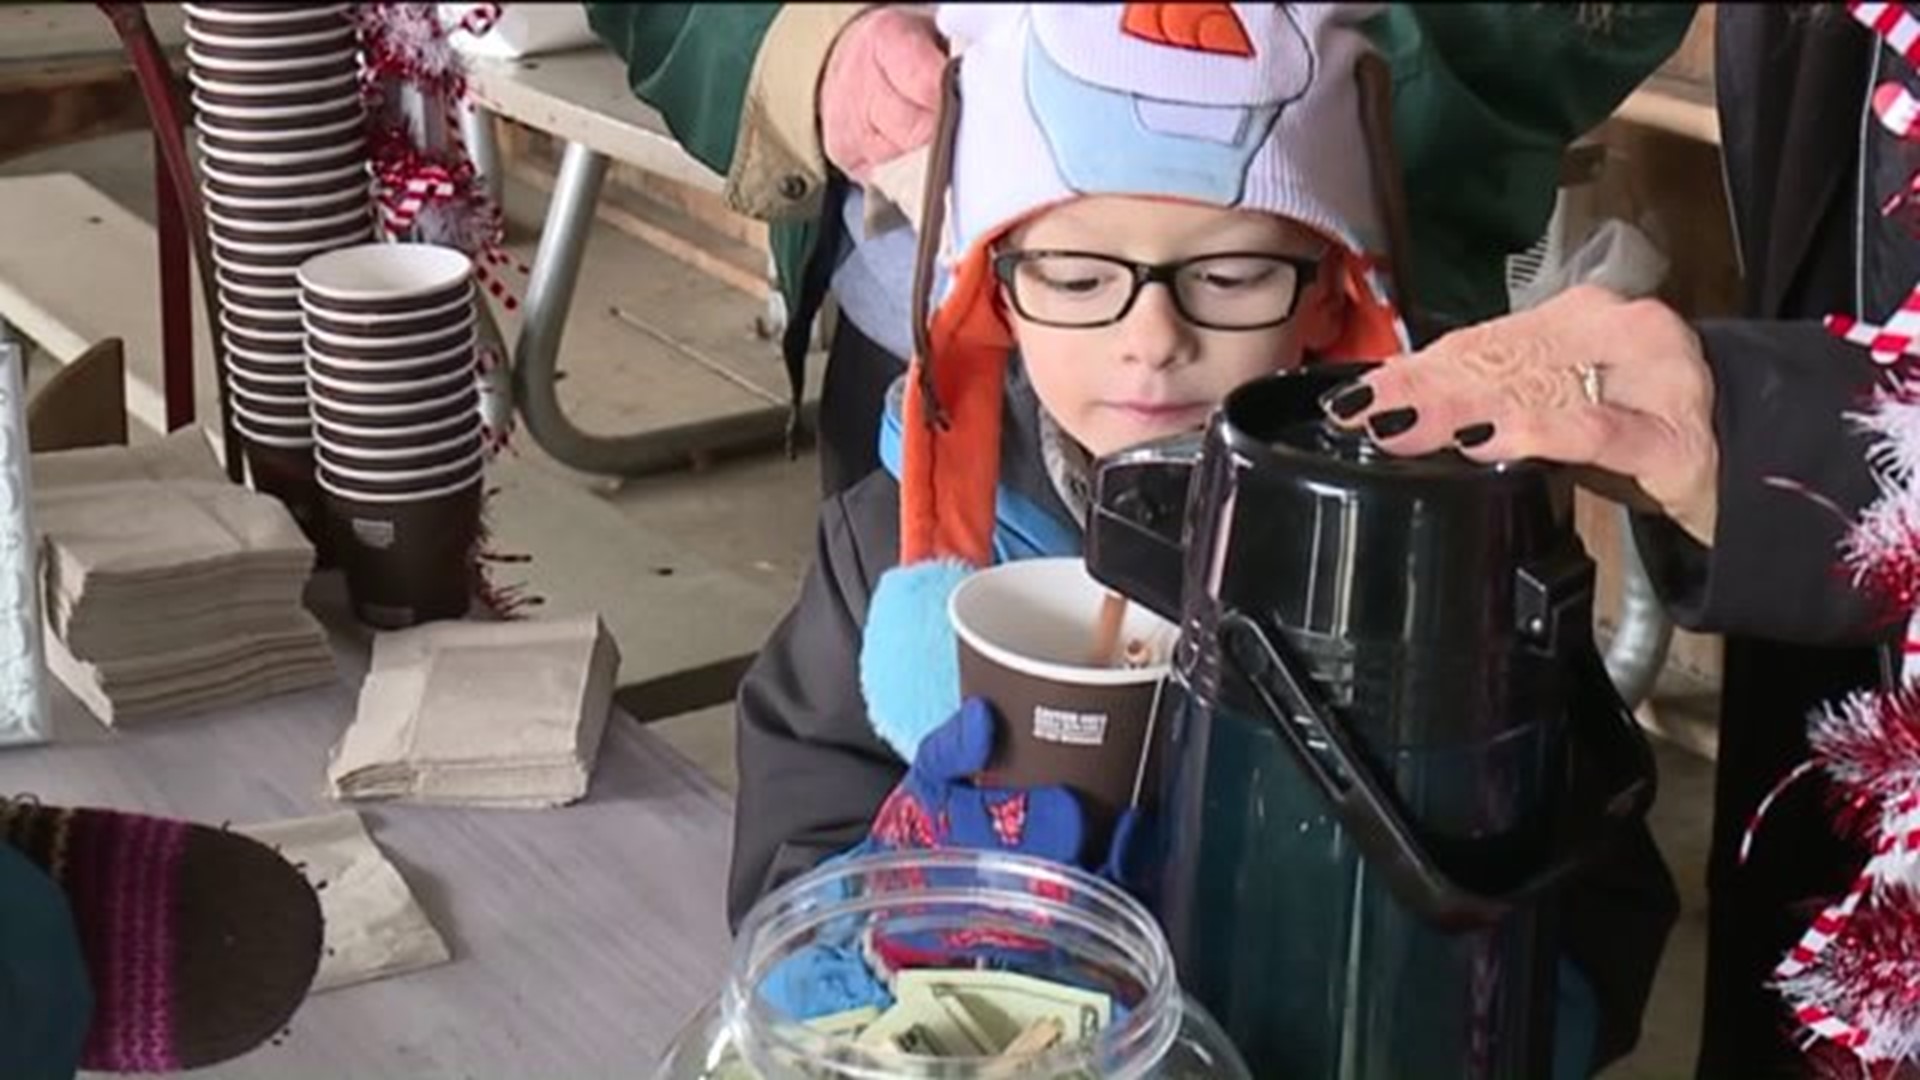 6-Year-Old Boy with Cancer Holds Hot Cocoa Stand to Help Fight Childhood Cancer